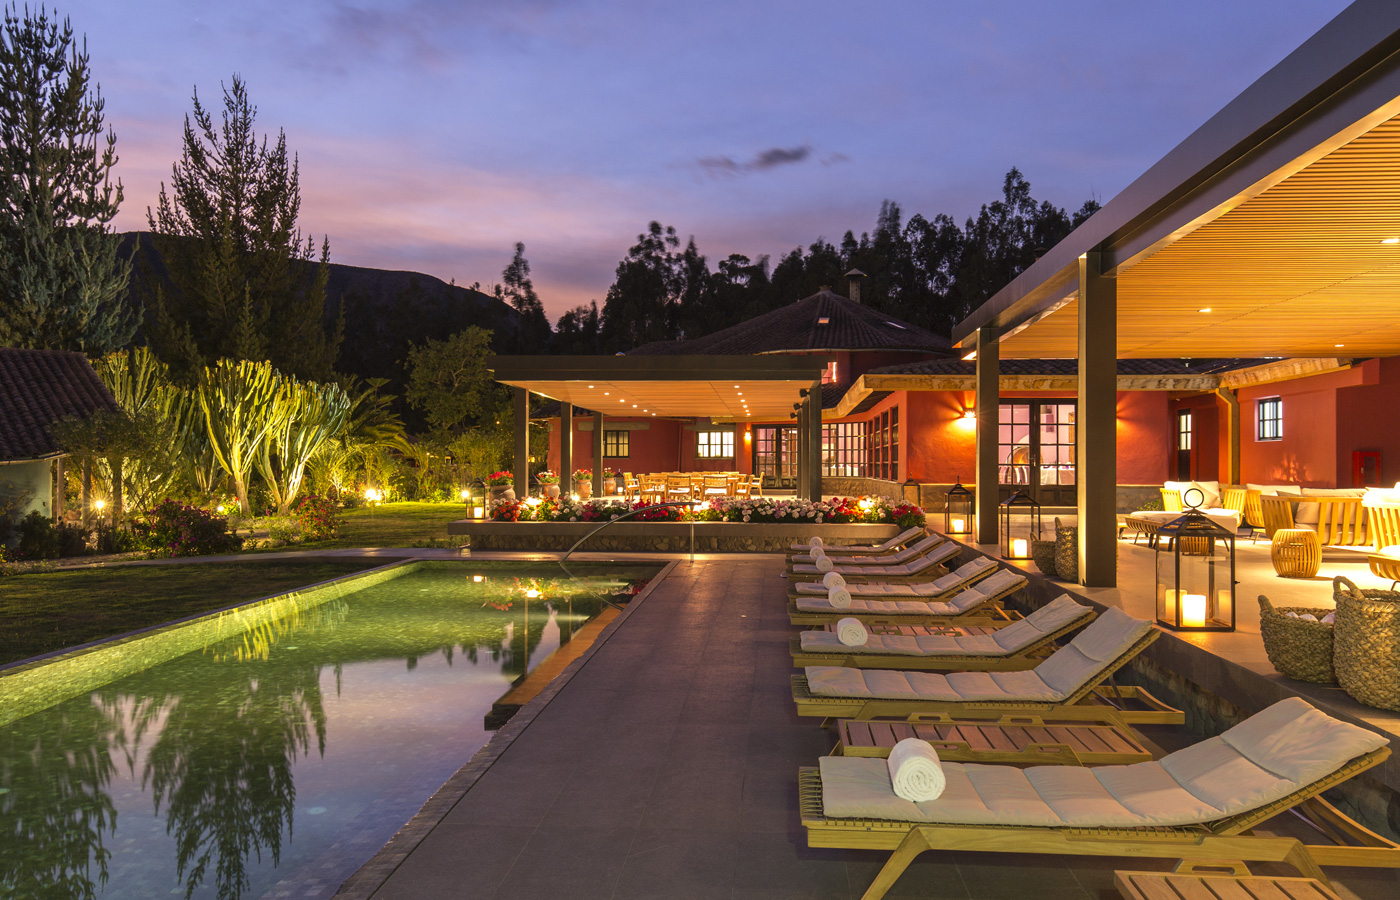 Sol y Luna boasts a stunning outdoor pool with lovely views of the gardens and across the surrounding mountains.